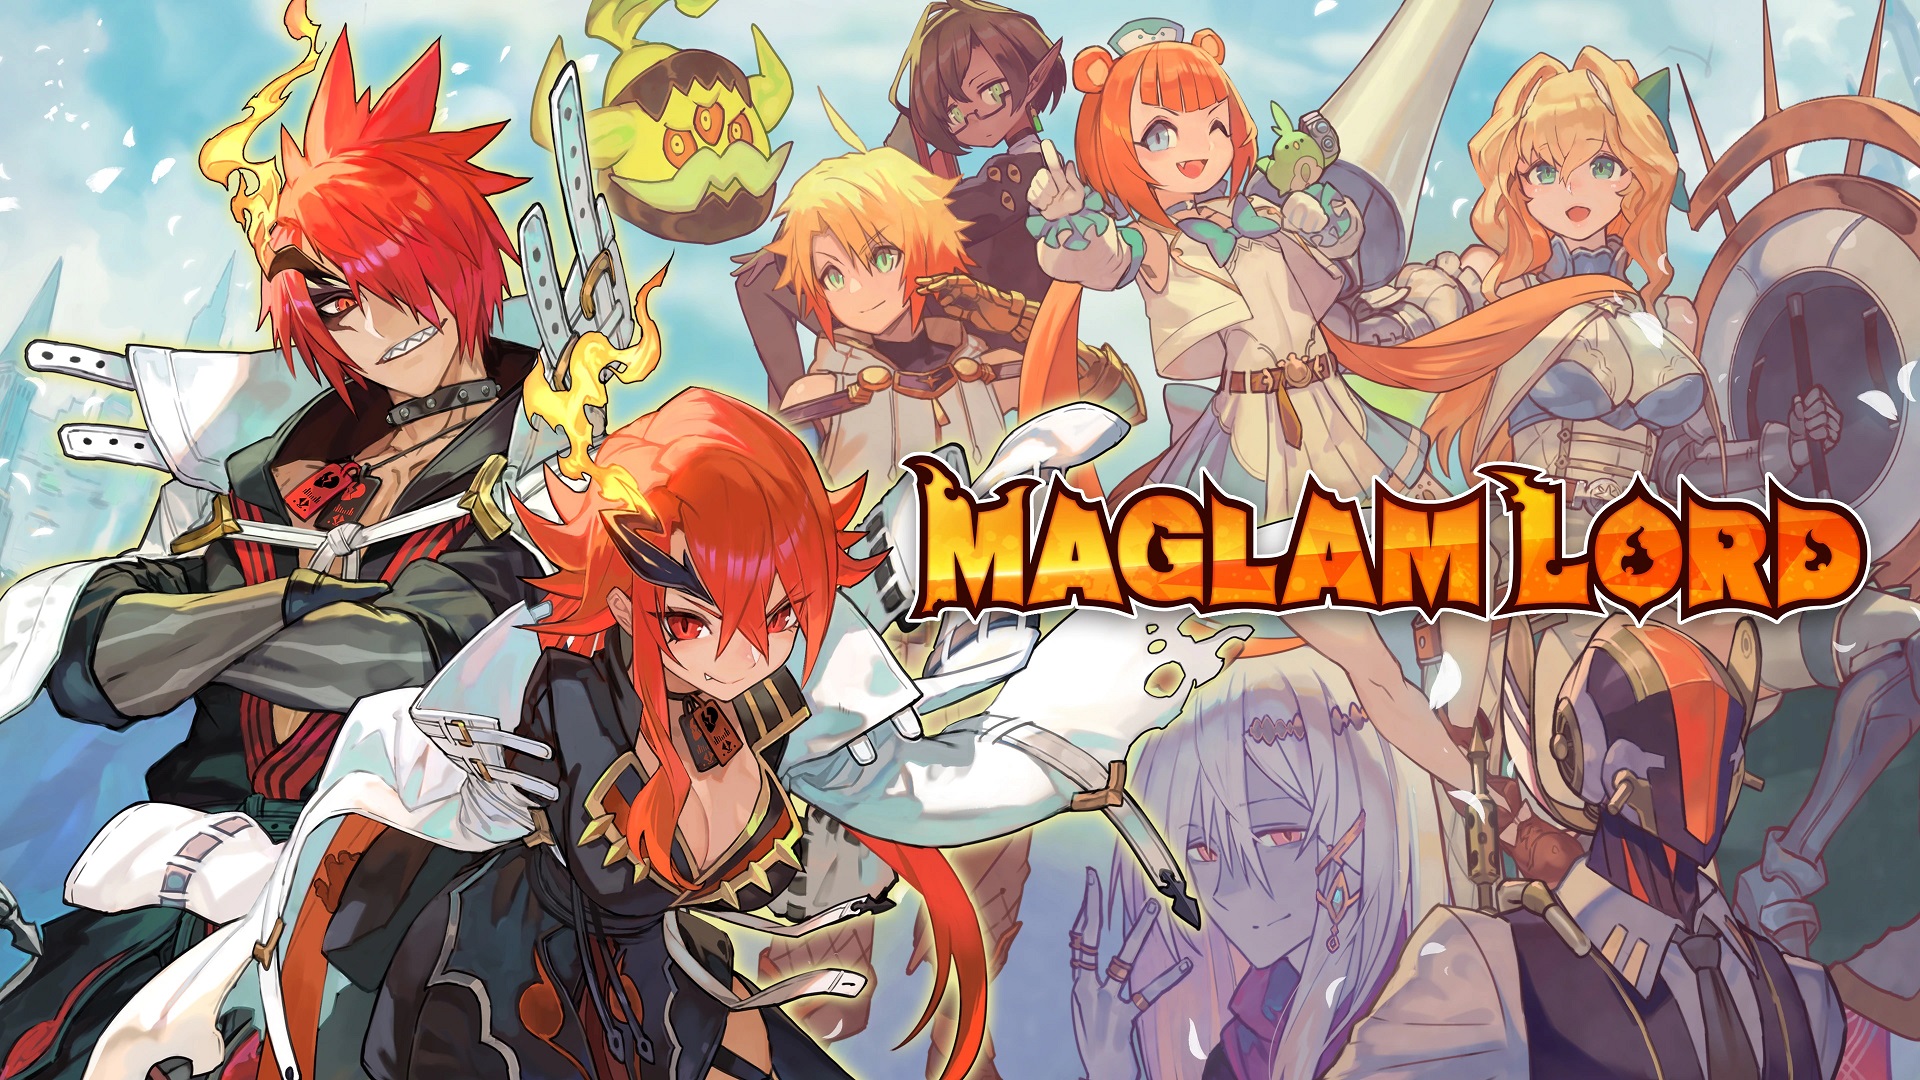 Maglam Lord Review